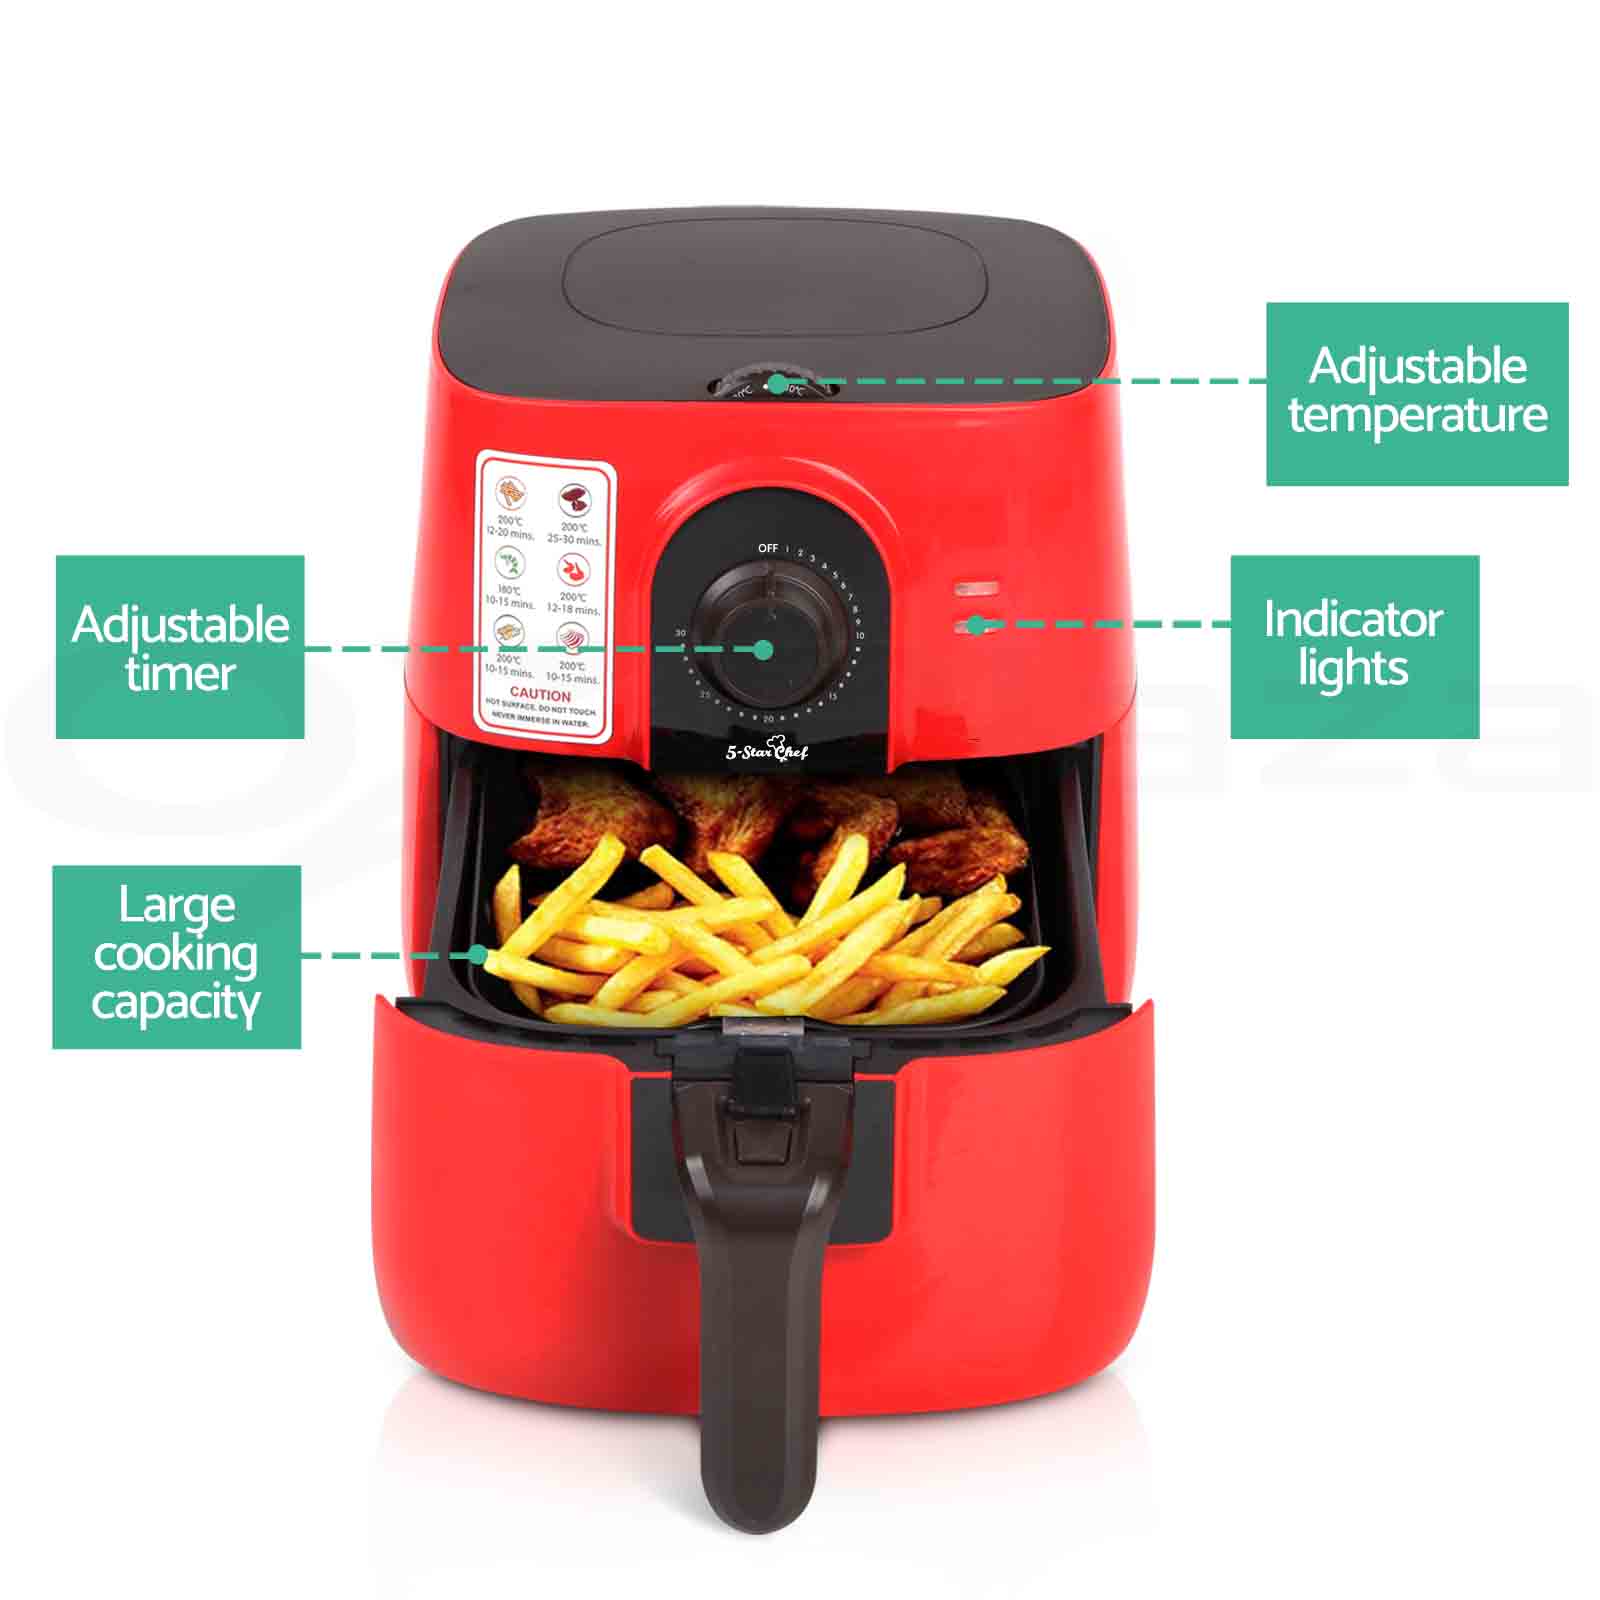 5 star chef air fryer instructions